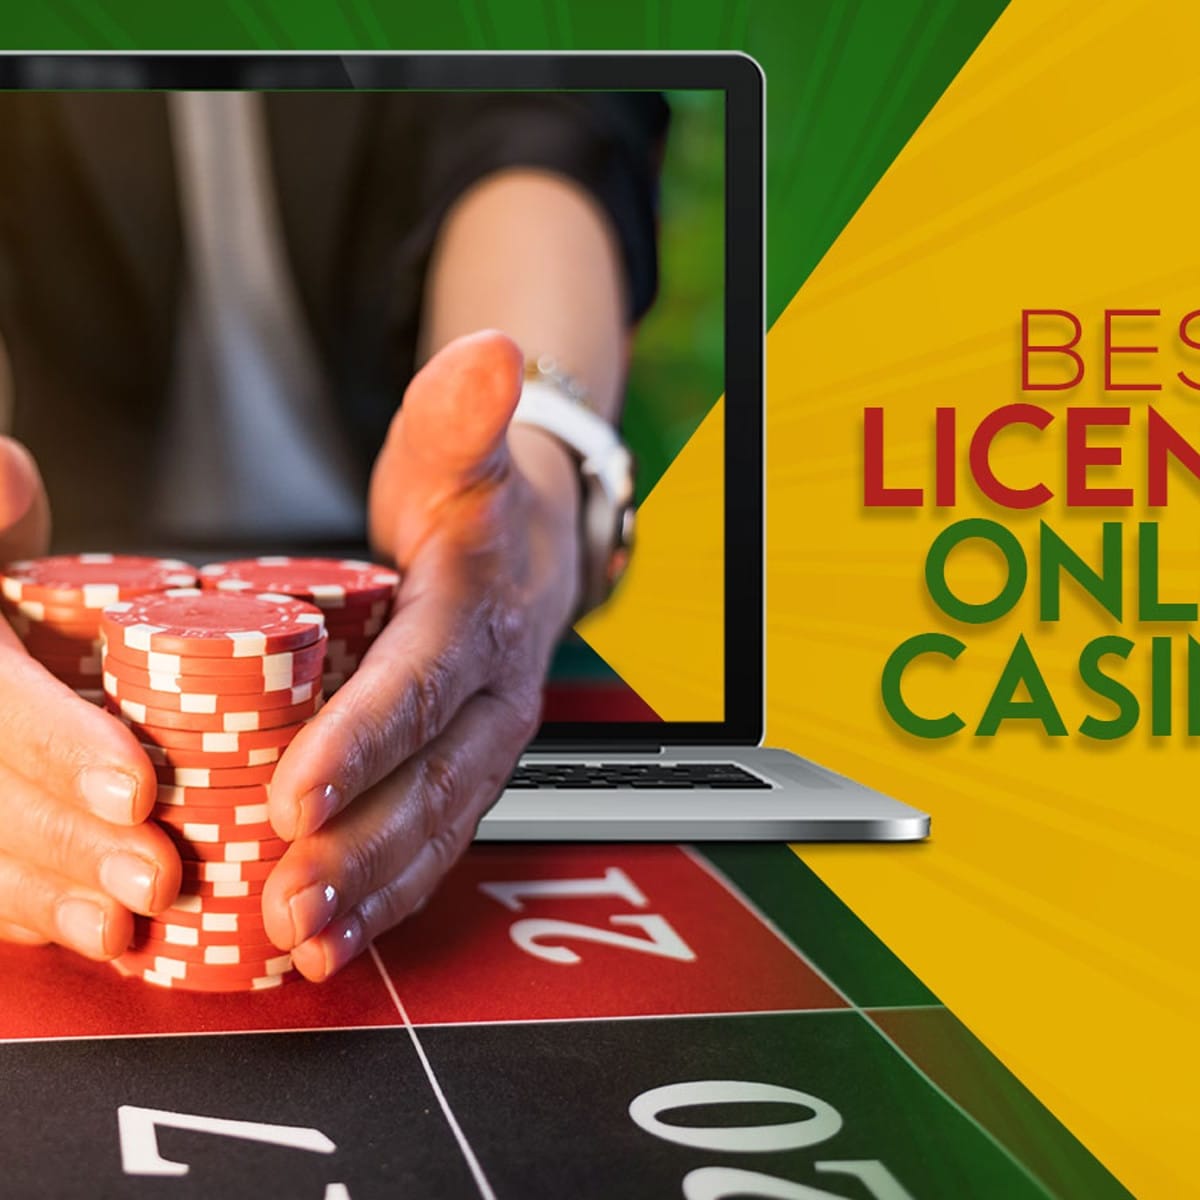 casino online - What To Do When Rejected